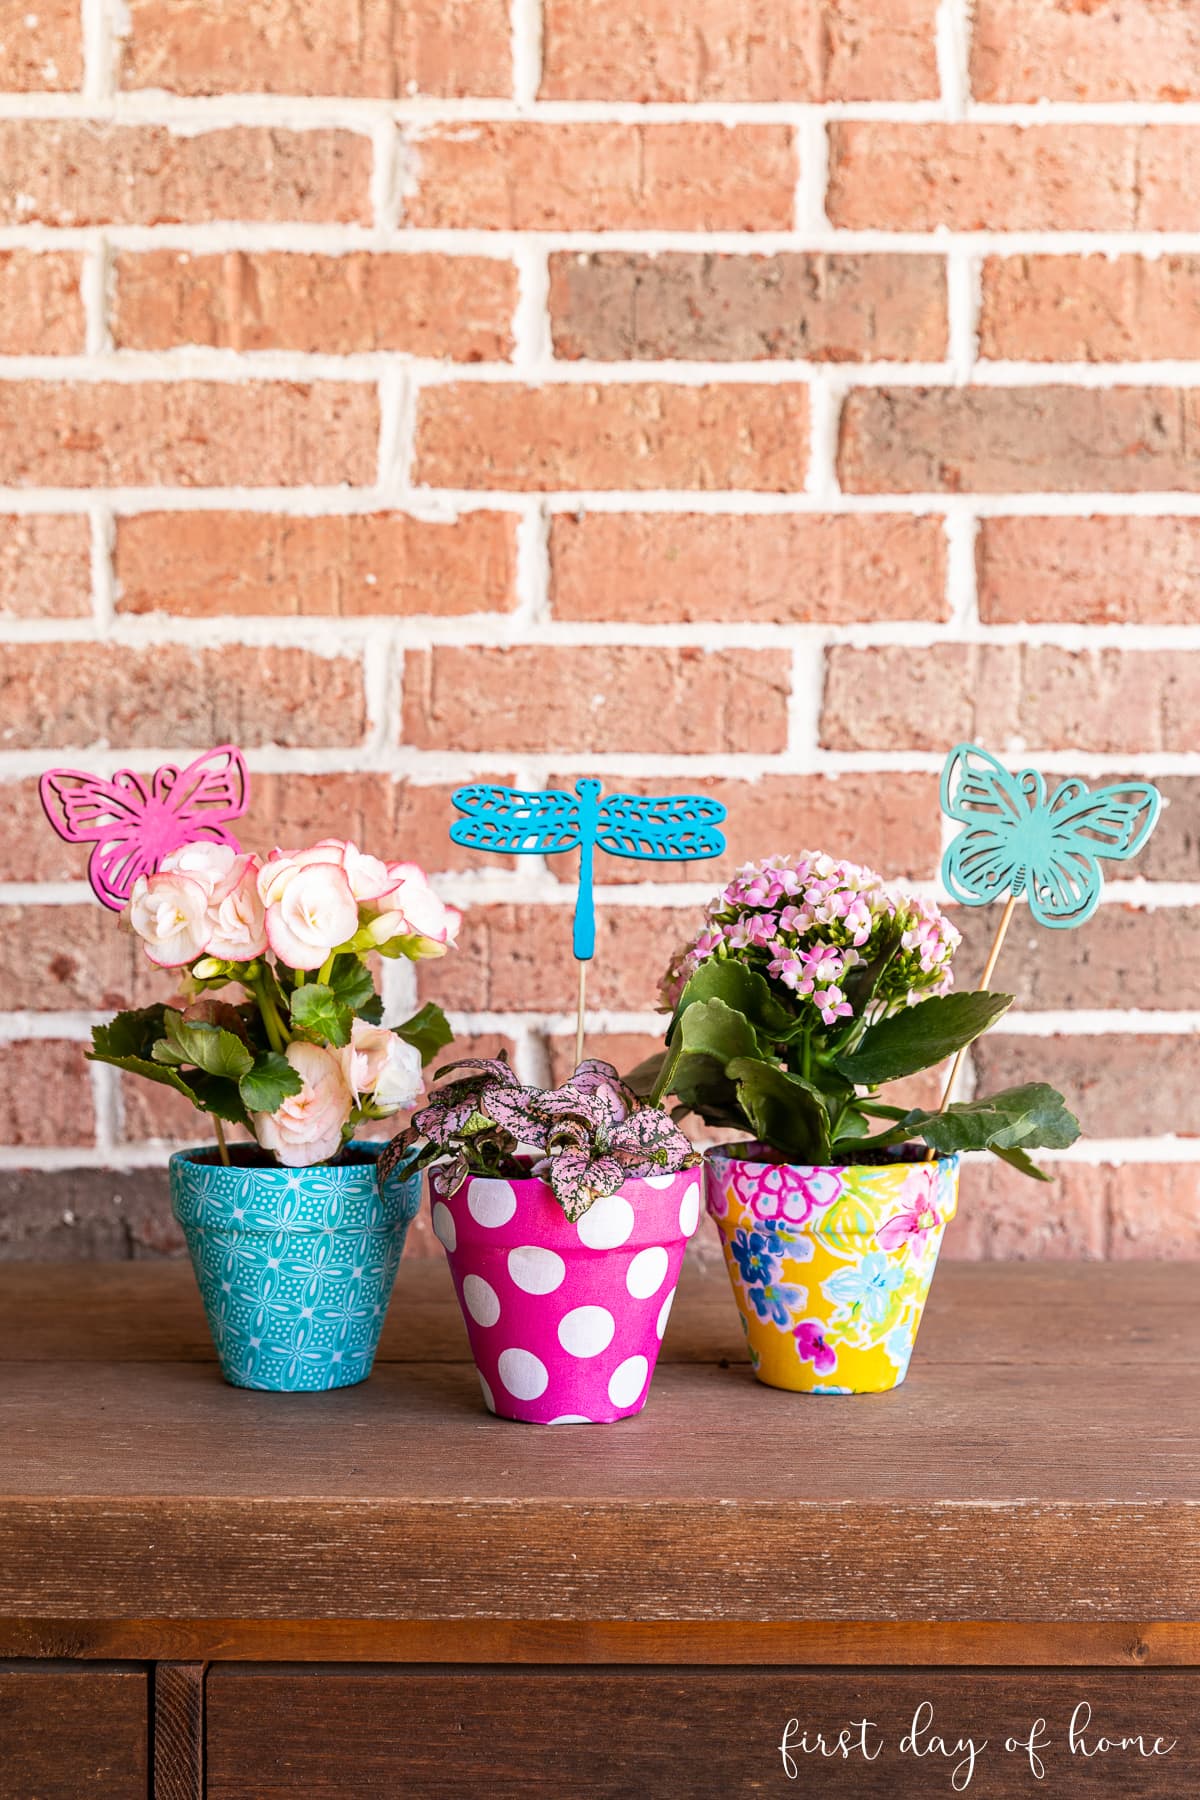 Trio of fabric covered flower pots with wooden stakes in the shape of butterflies and dragon flies.